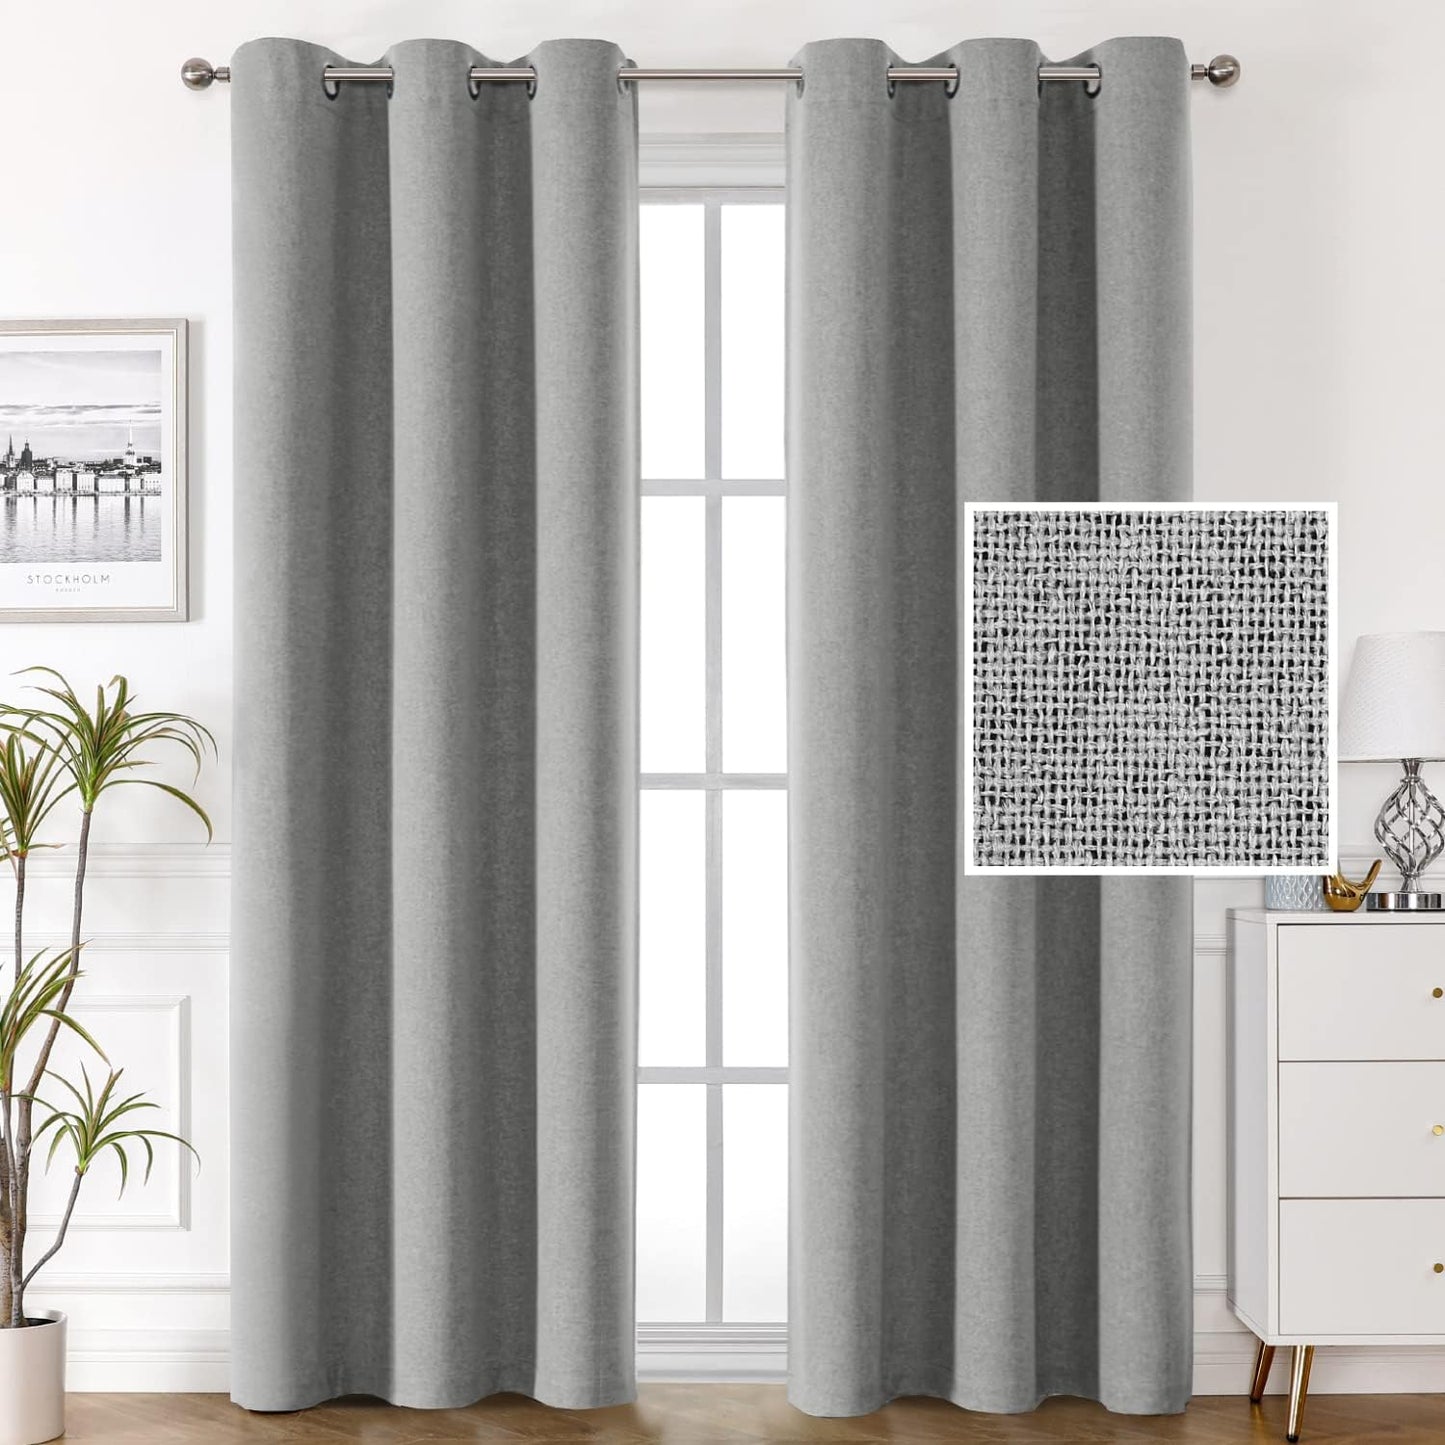 H.VERSAILTEX 100% Blackout Linen Look Curtains Thermal Insulated Curtains for Living Room Textured Burlap Drapes for Bedroom Grommet Linen Noise Blocking Curtains 42 X 84 Inch, 2 Panels - Sage  H.VERSAILTEX Grey 42"W X 84"L 